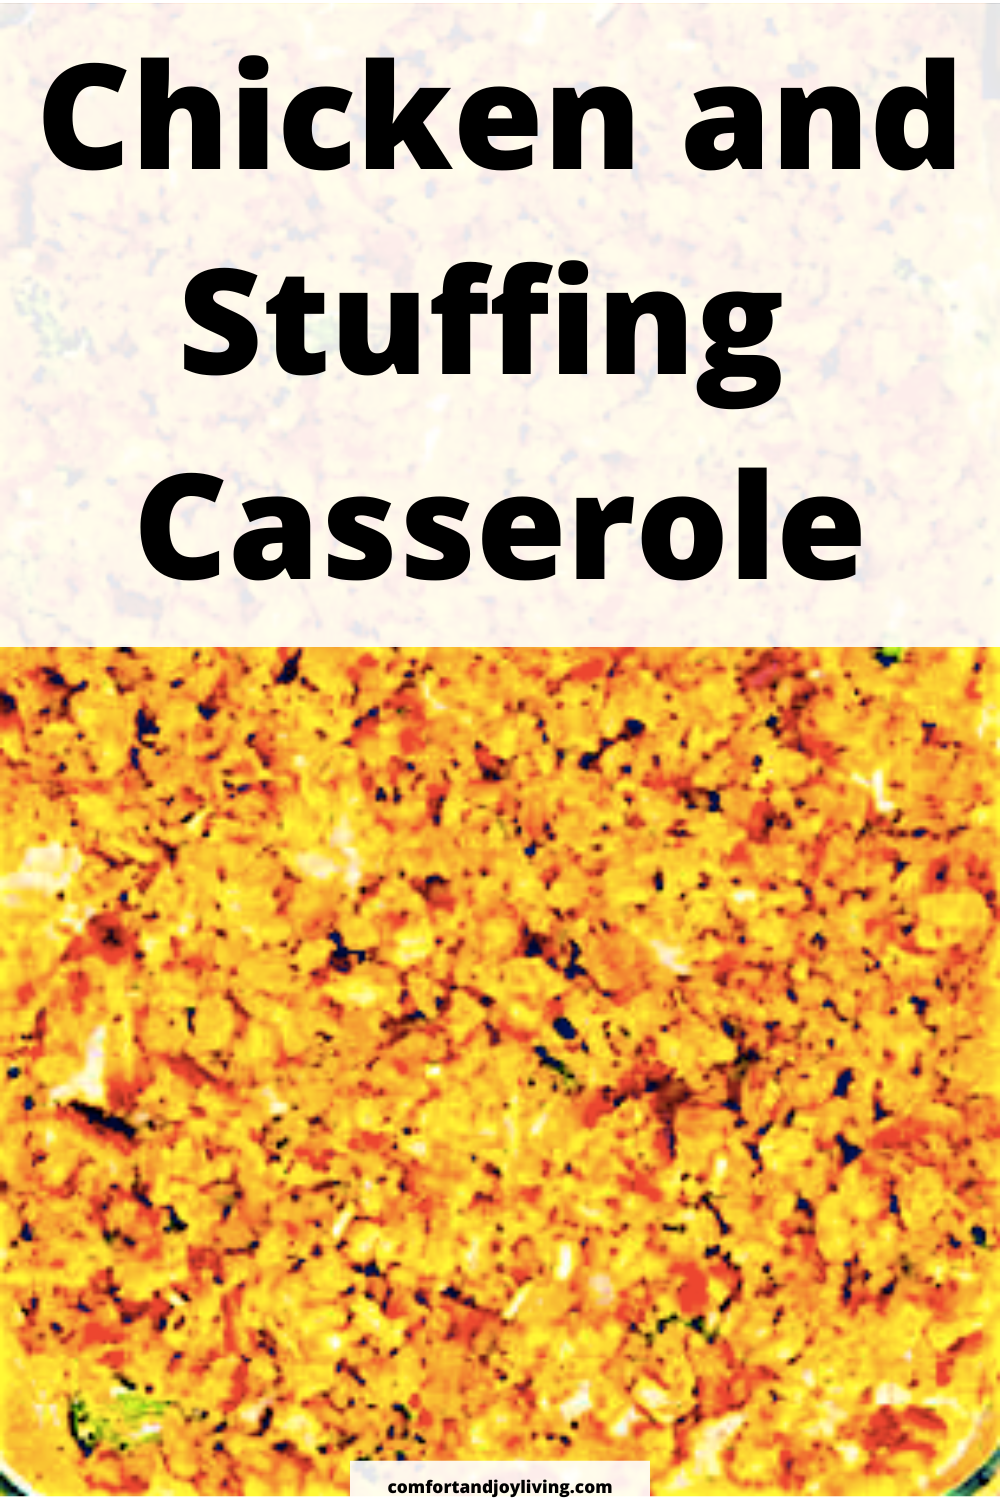 Chicken-and-Stuffing-Casserole.png